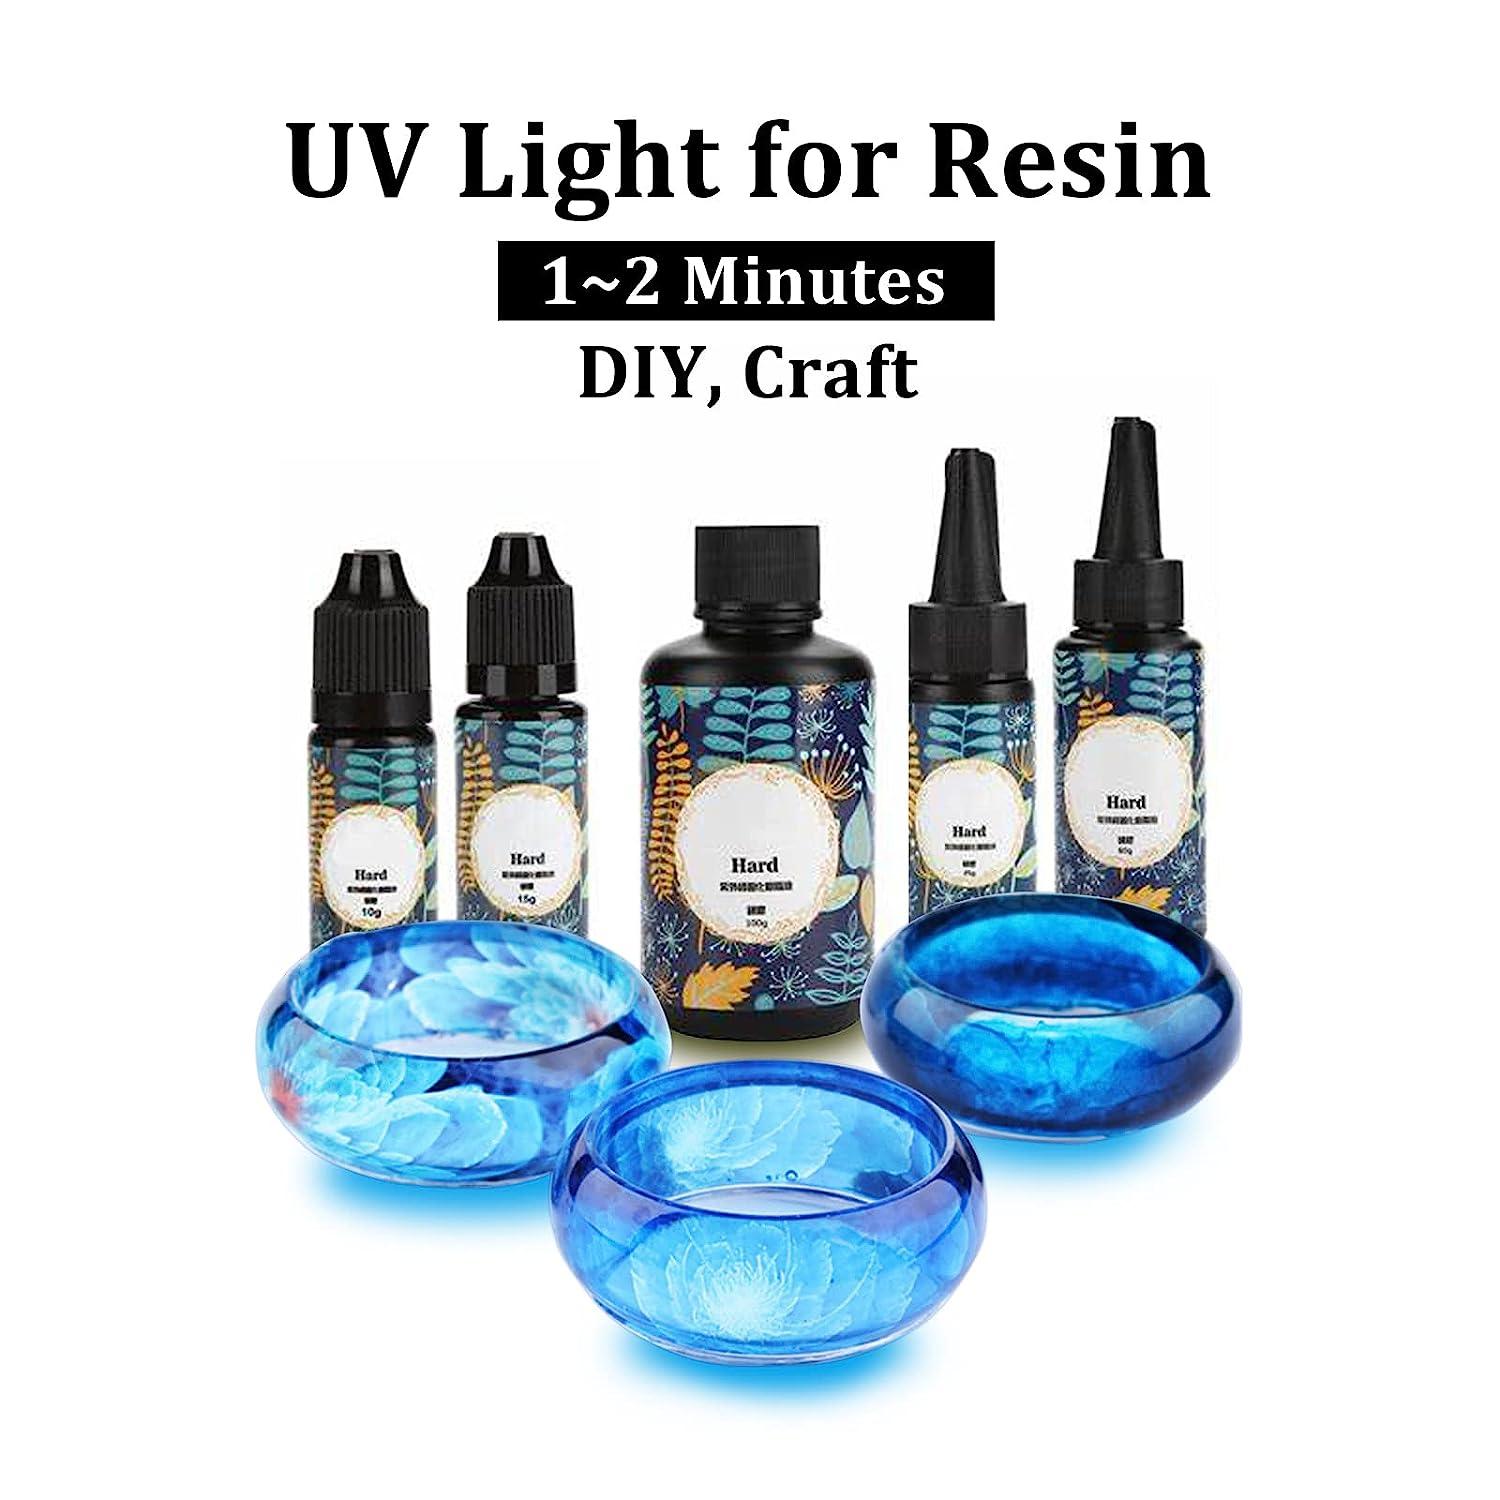 UV Resin Curing Light Box with 6 High Power UV LED Beads